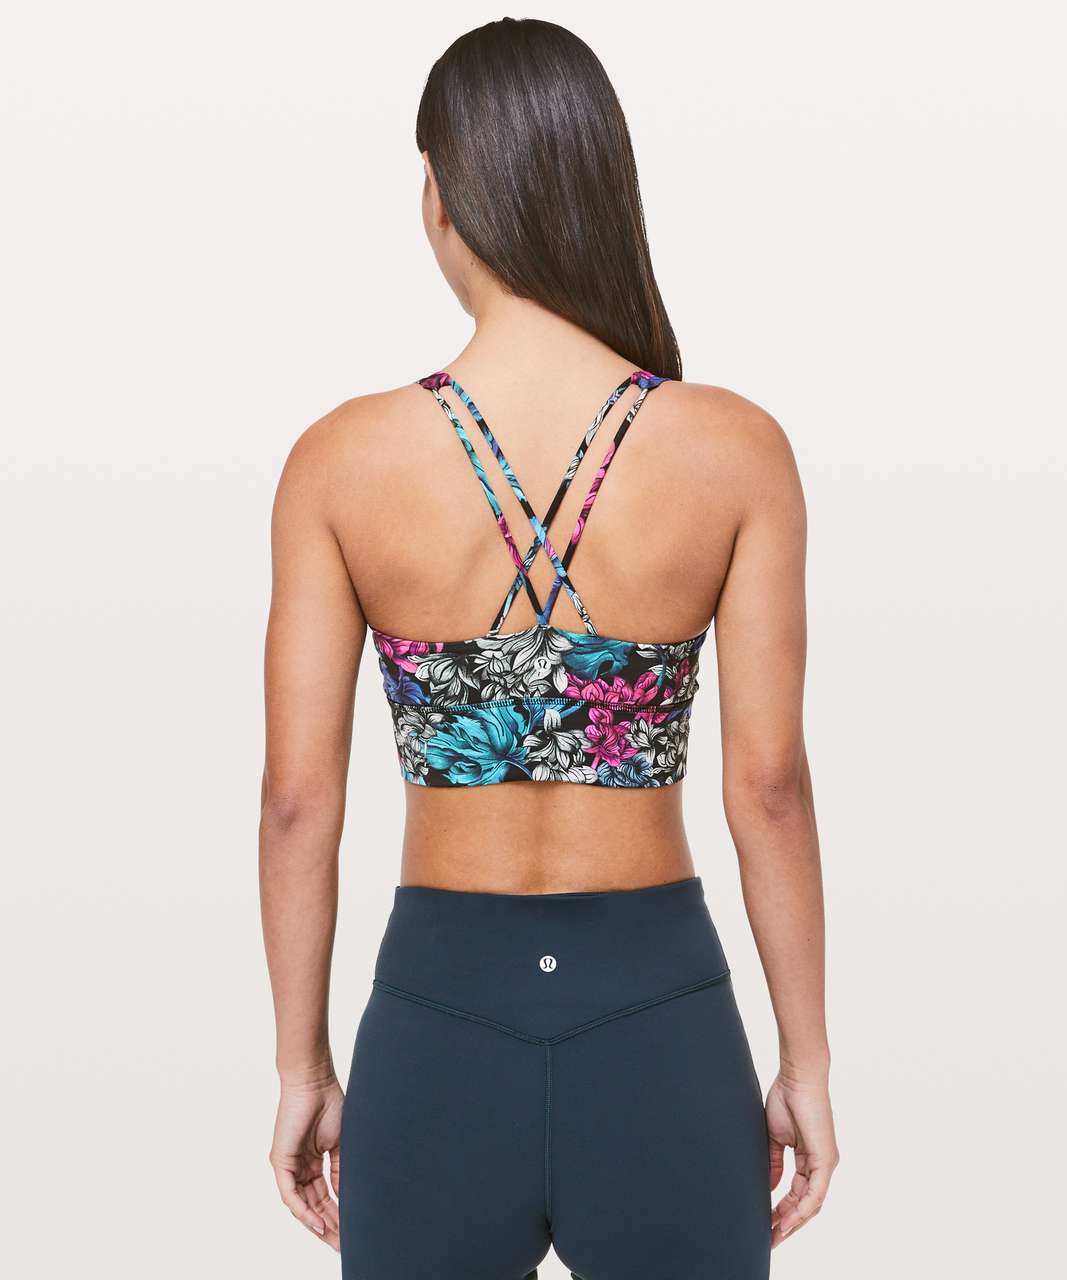 Lululemon Free To Be Bra *Long Line - Nocturnal Floral Multi